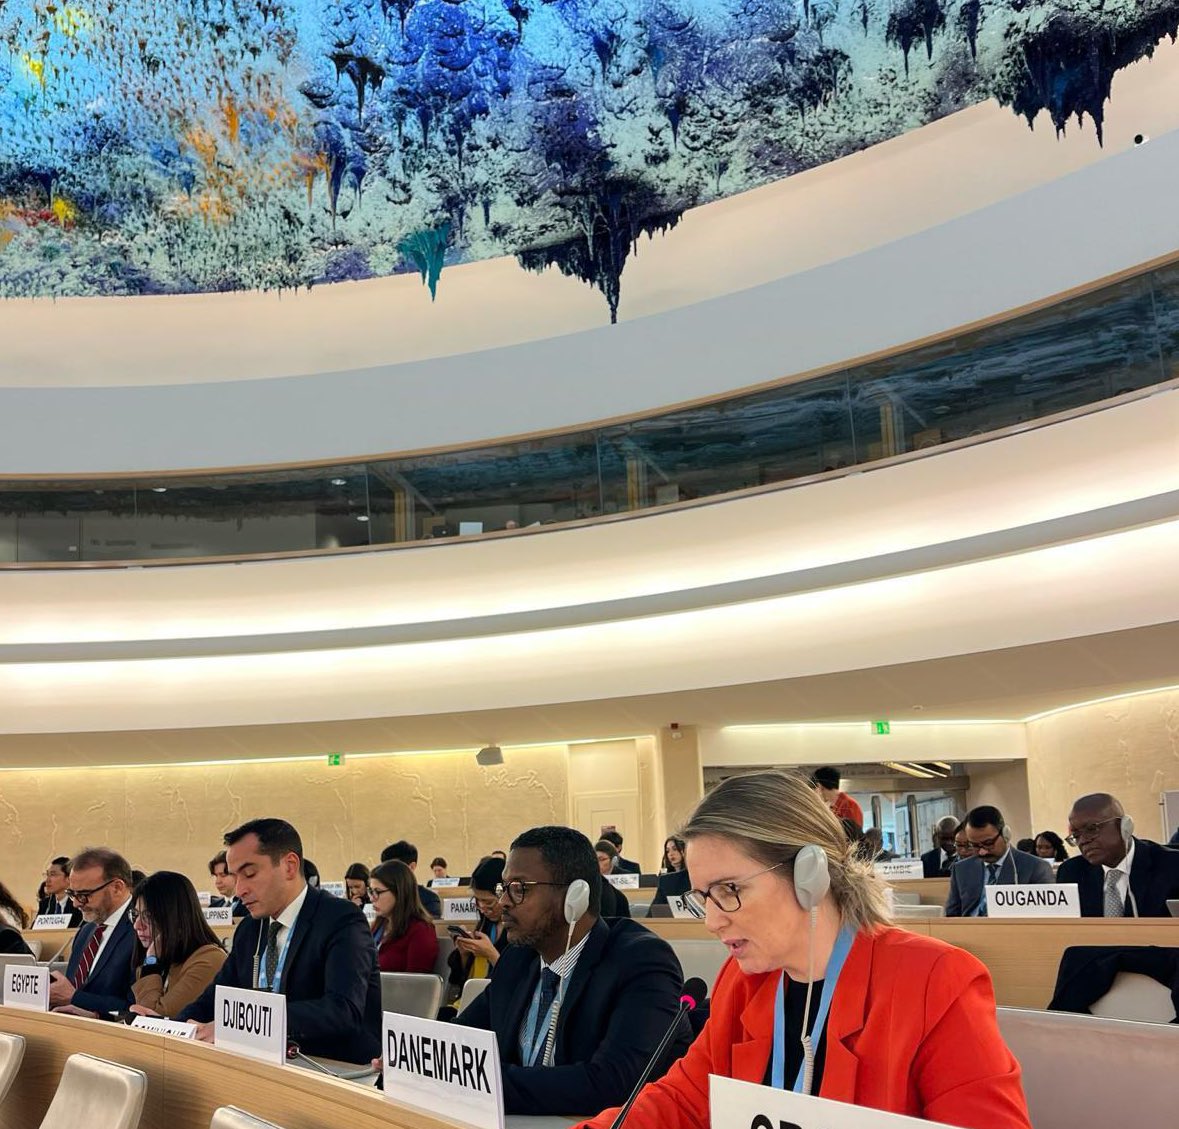 Denmark remains strongly committed to upholding the rights to freedom of opinion, expression, peaceful assembly & association🗣️ This is why we delivered concrete recommendations on these issues to 🇻🇳🇪🇷🇩🇴 & 🇰🇭 at #UPR46 Find all our recommendations here 👉fngeneve.um.dk/en/news